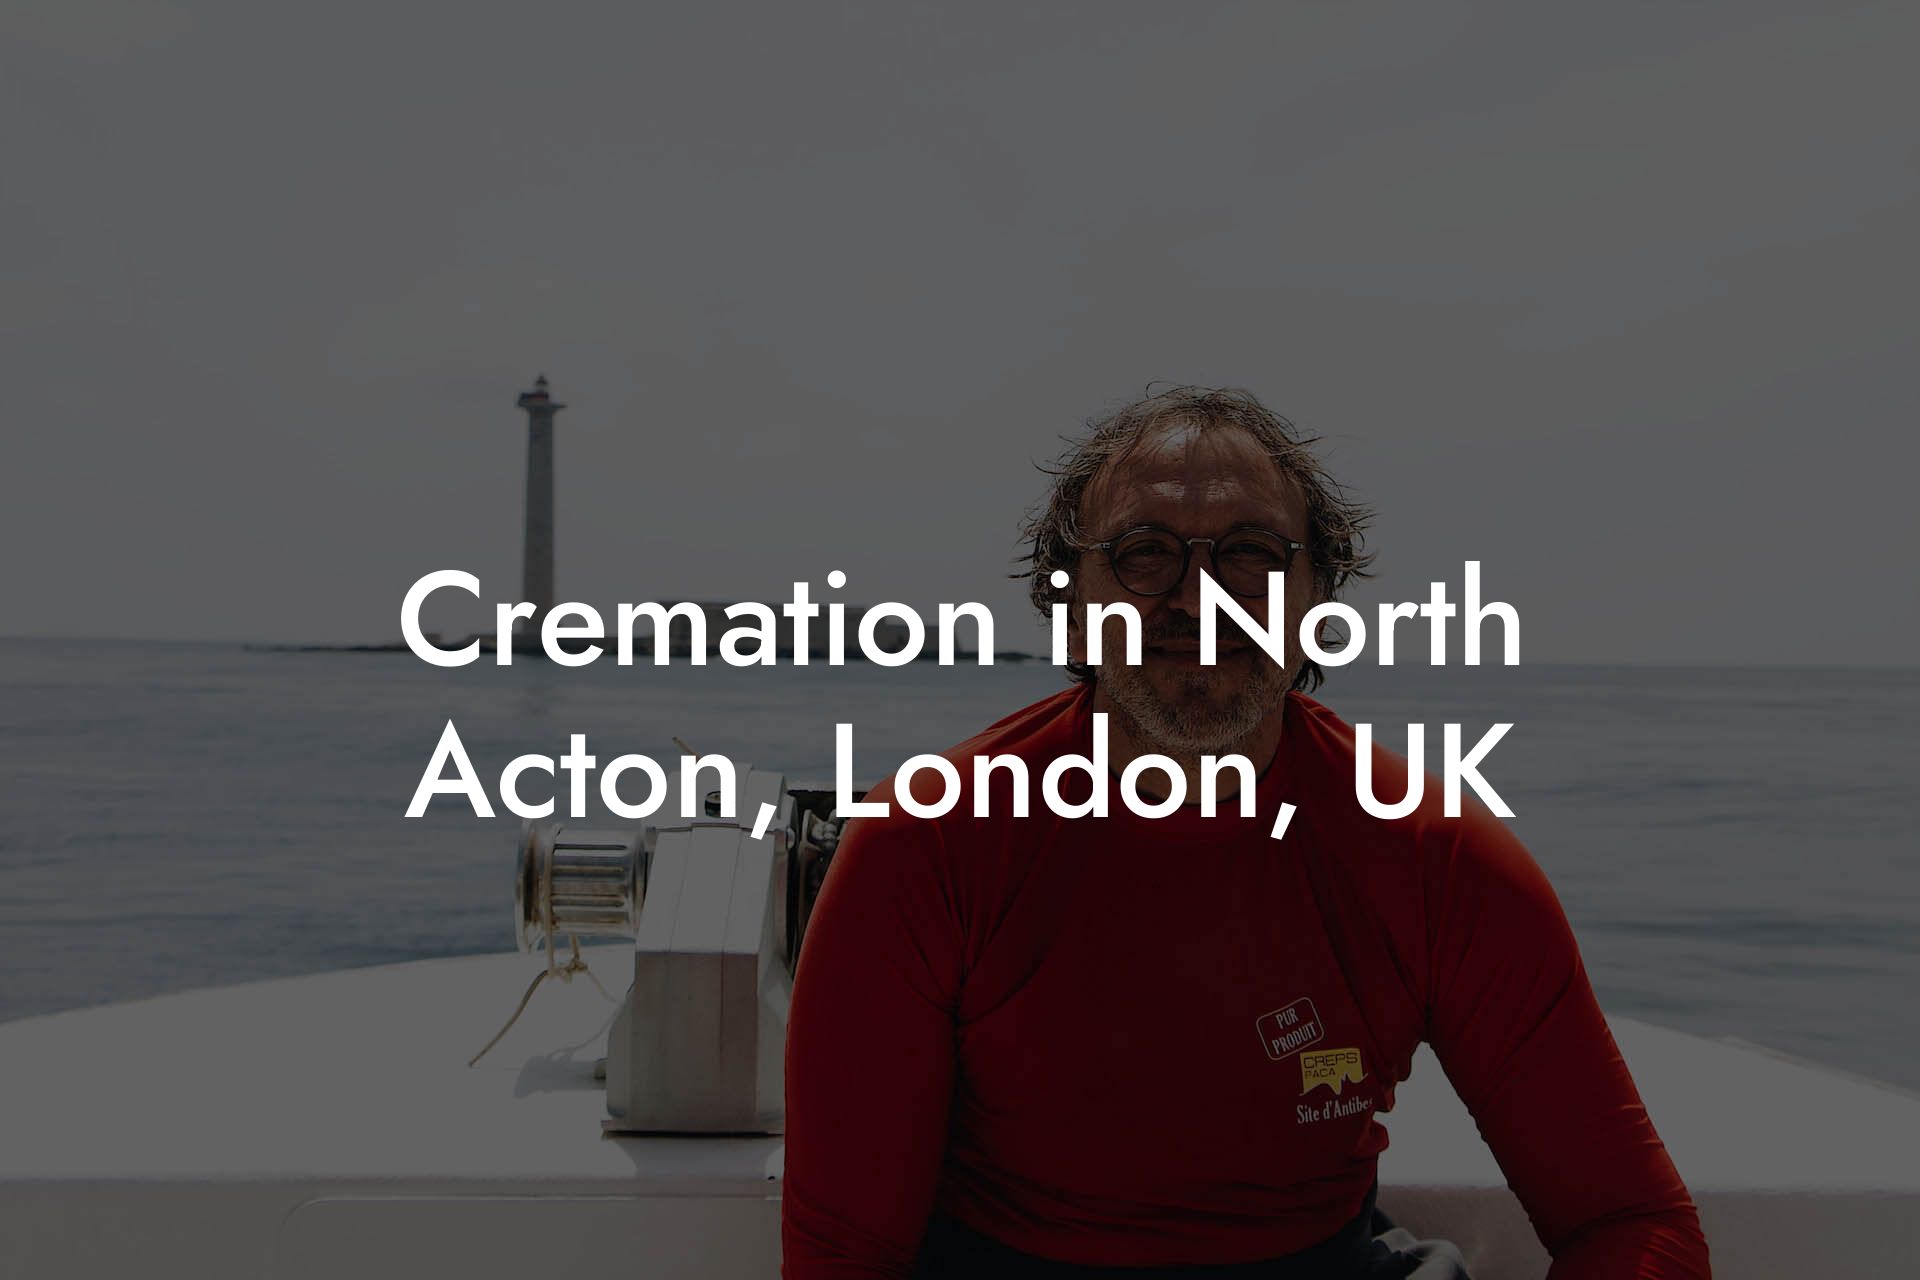 Cremation in North Acton, London, UK